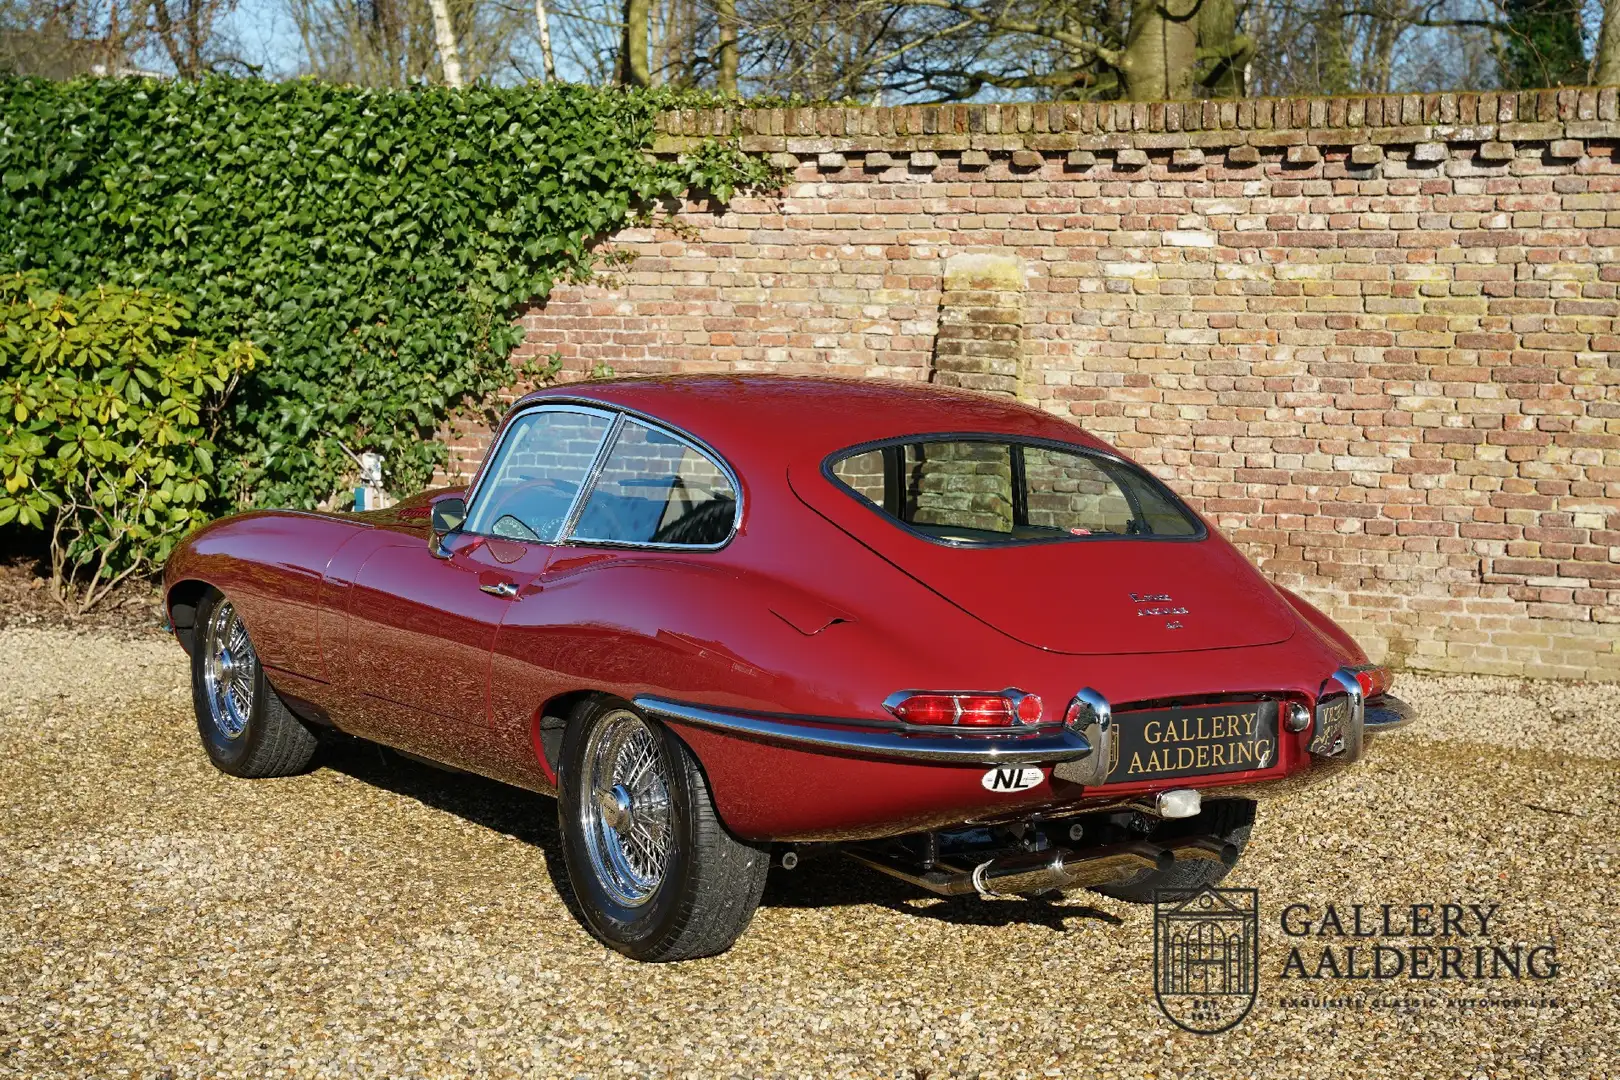 Jaguar E-Type 4.2 coupe series 1.5 Superb restored condition, Ma Red - 2